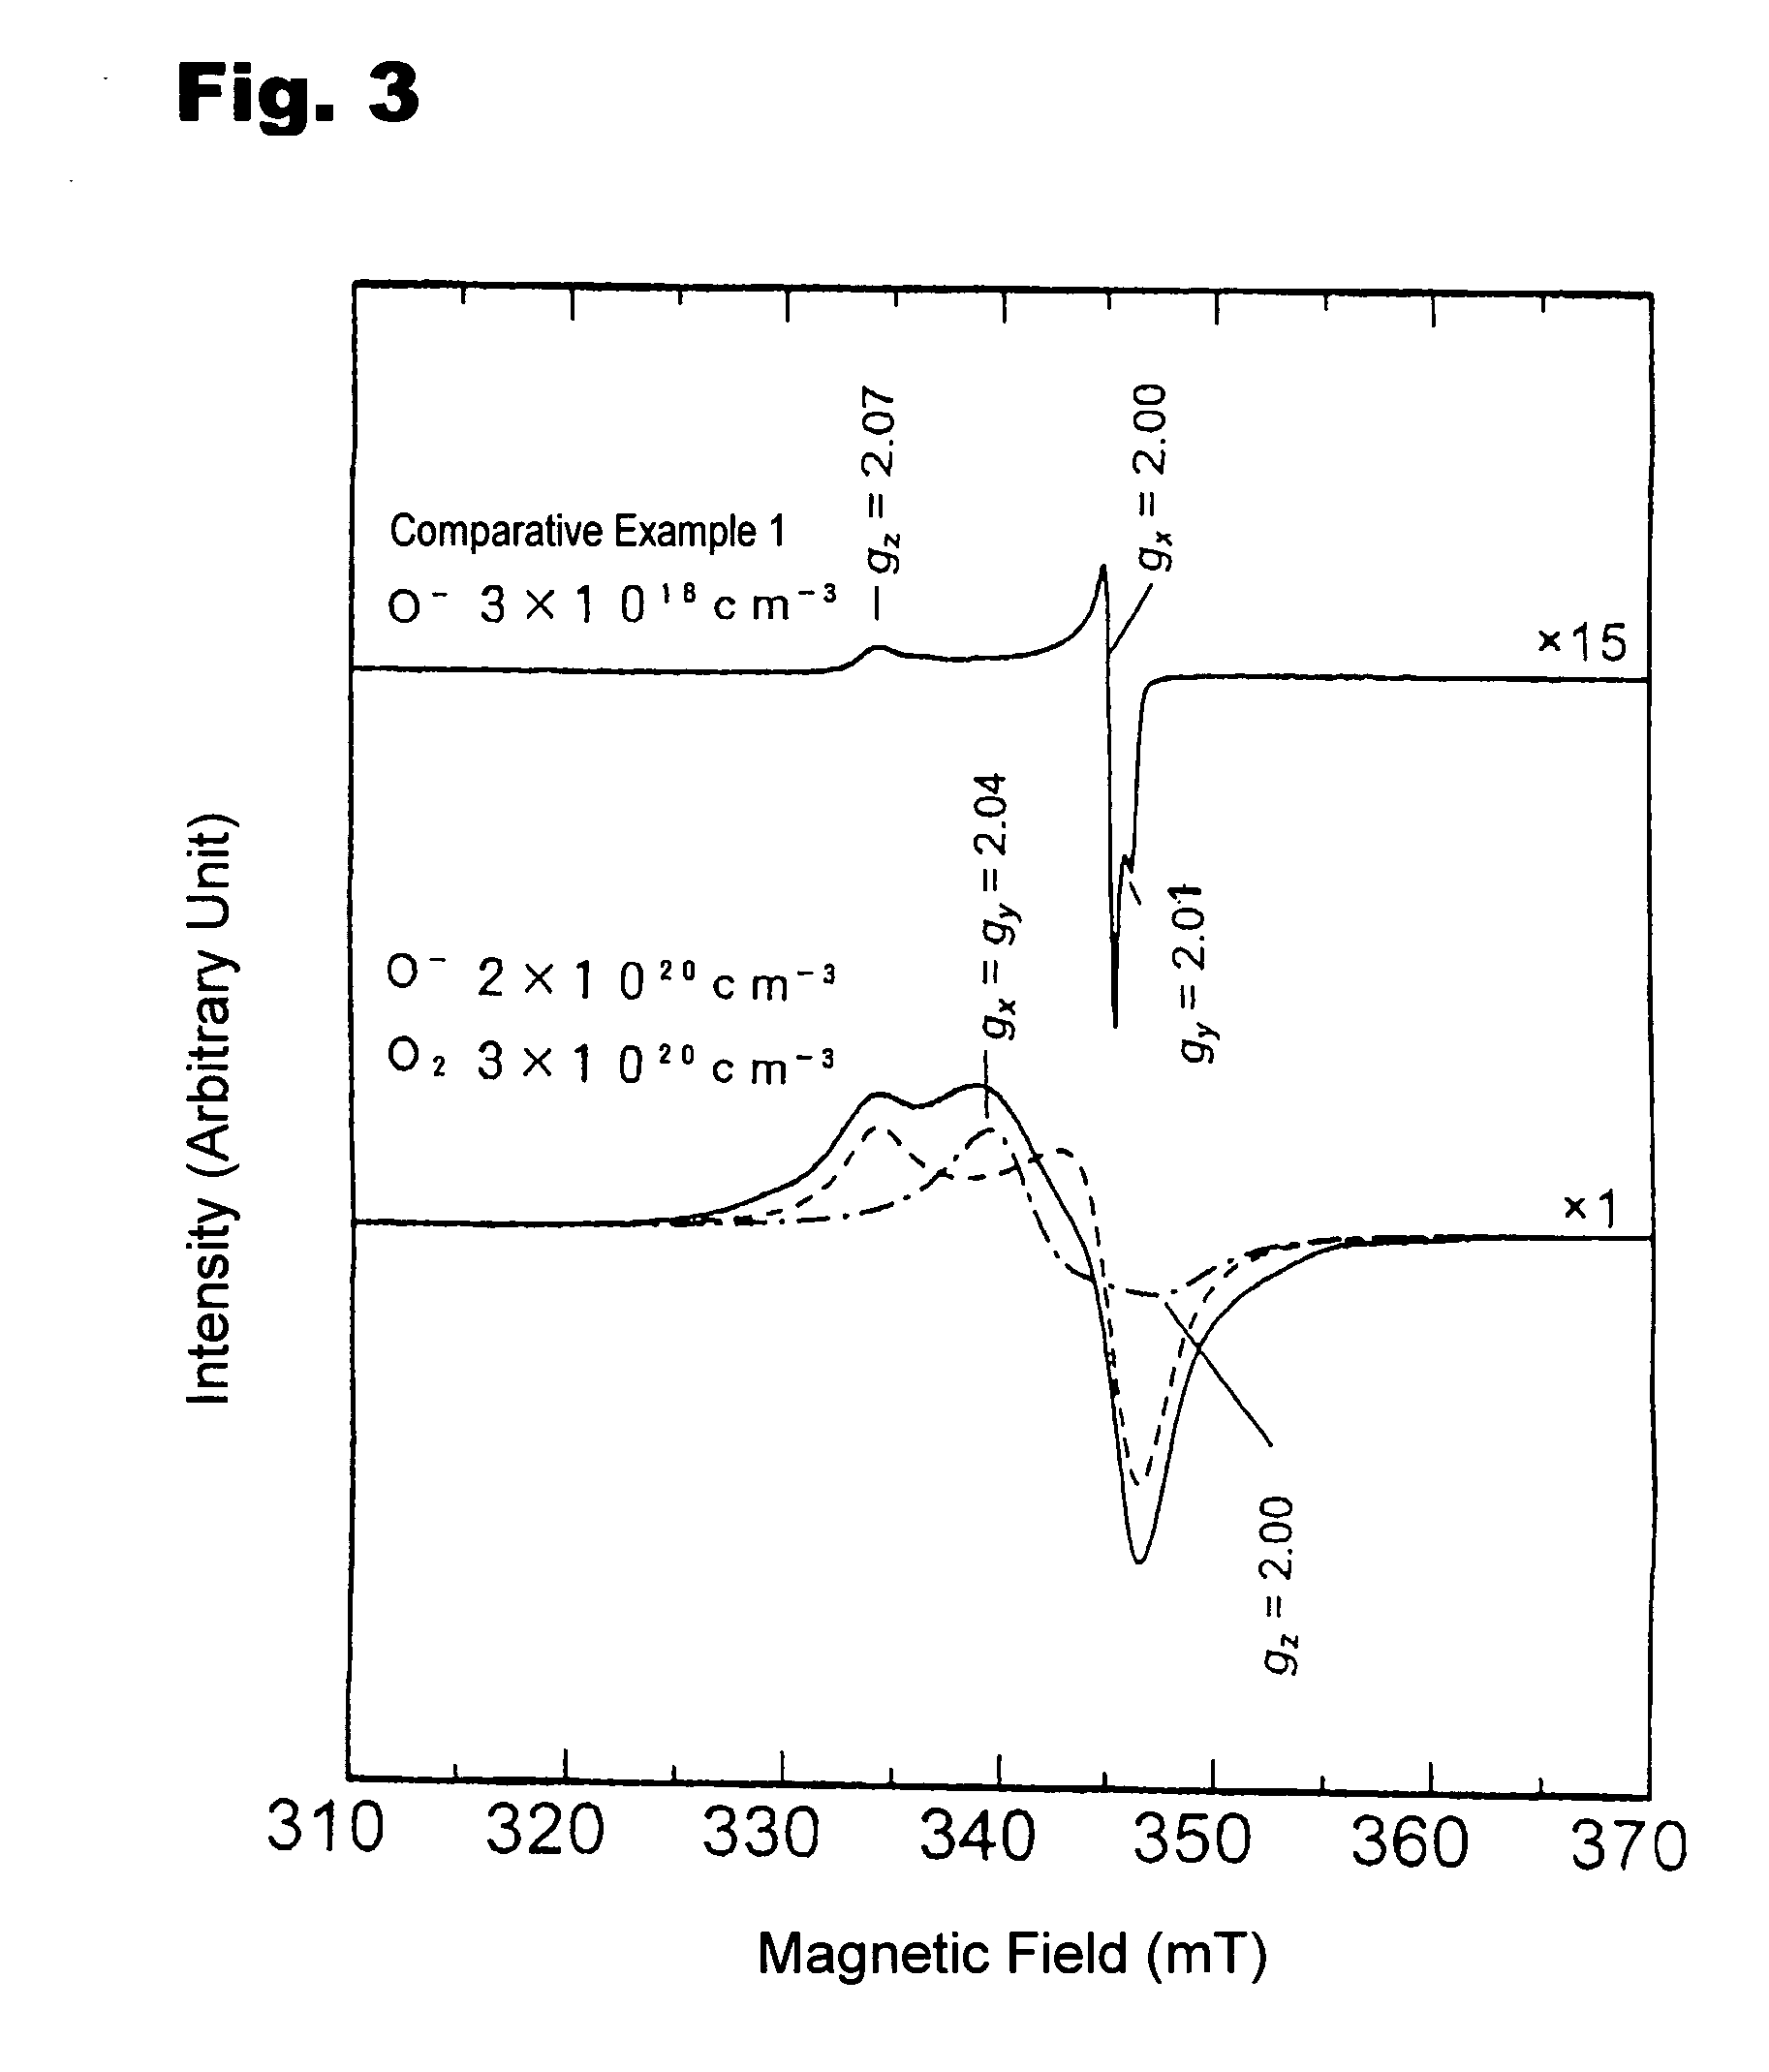 12CaO 7a12O3 compound and method for preparation thereof